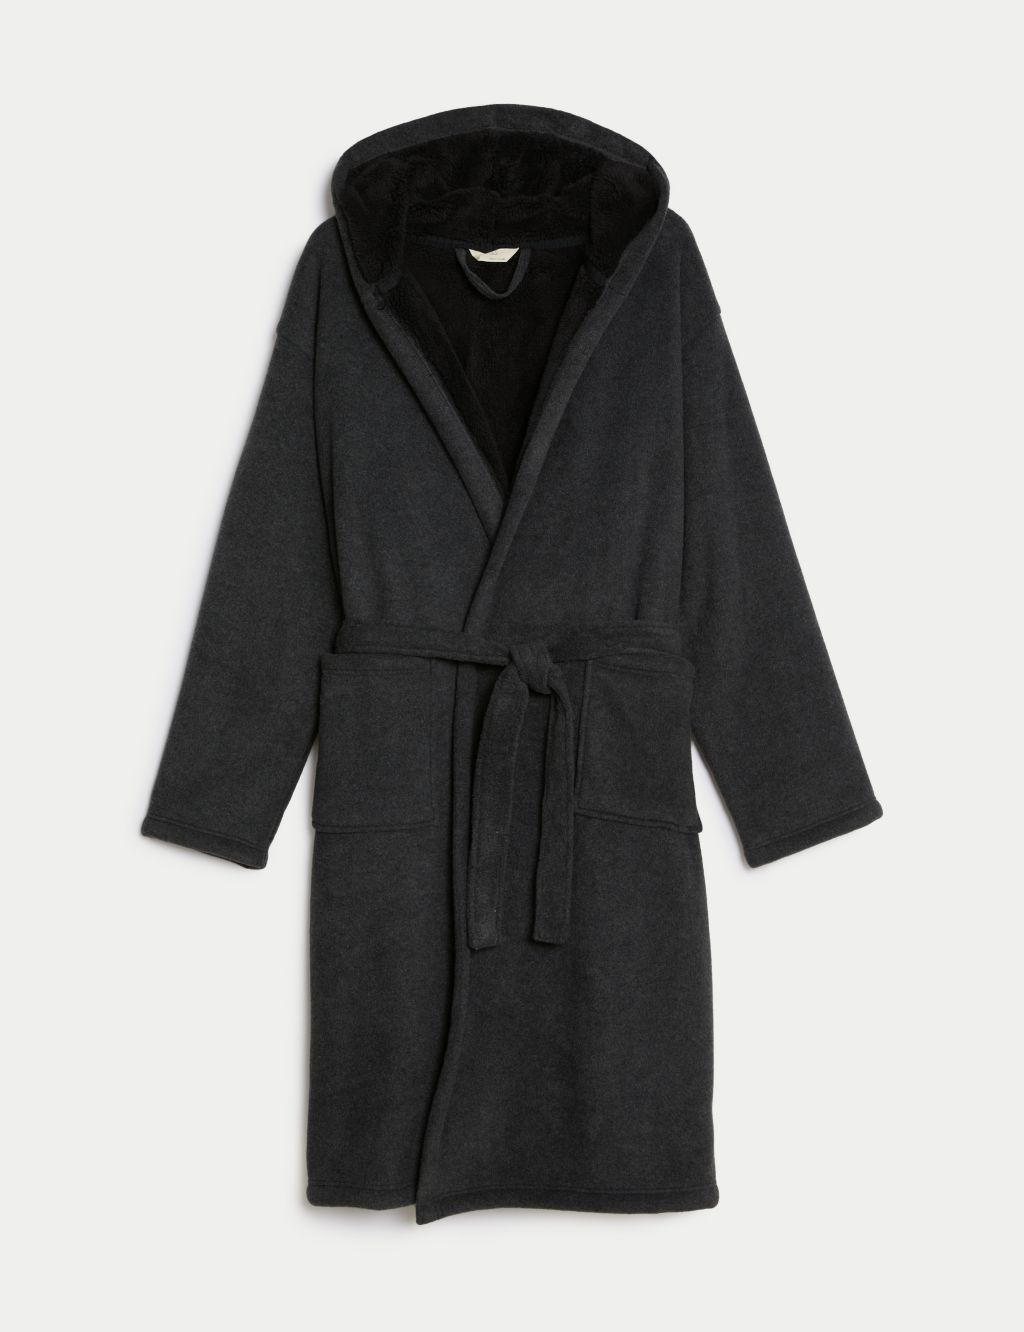 Fleece Supersoft Hooded Dressing Gown image 2